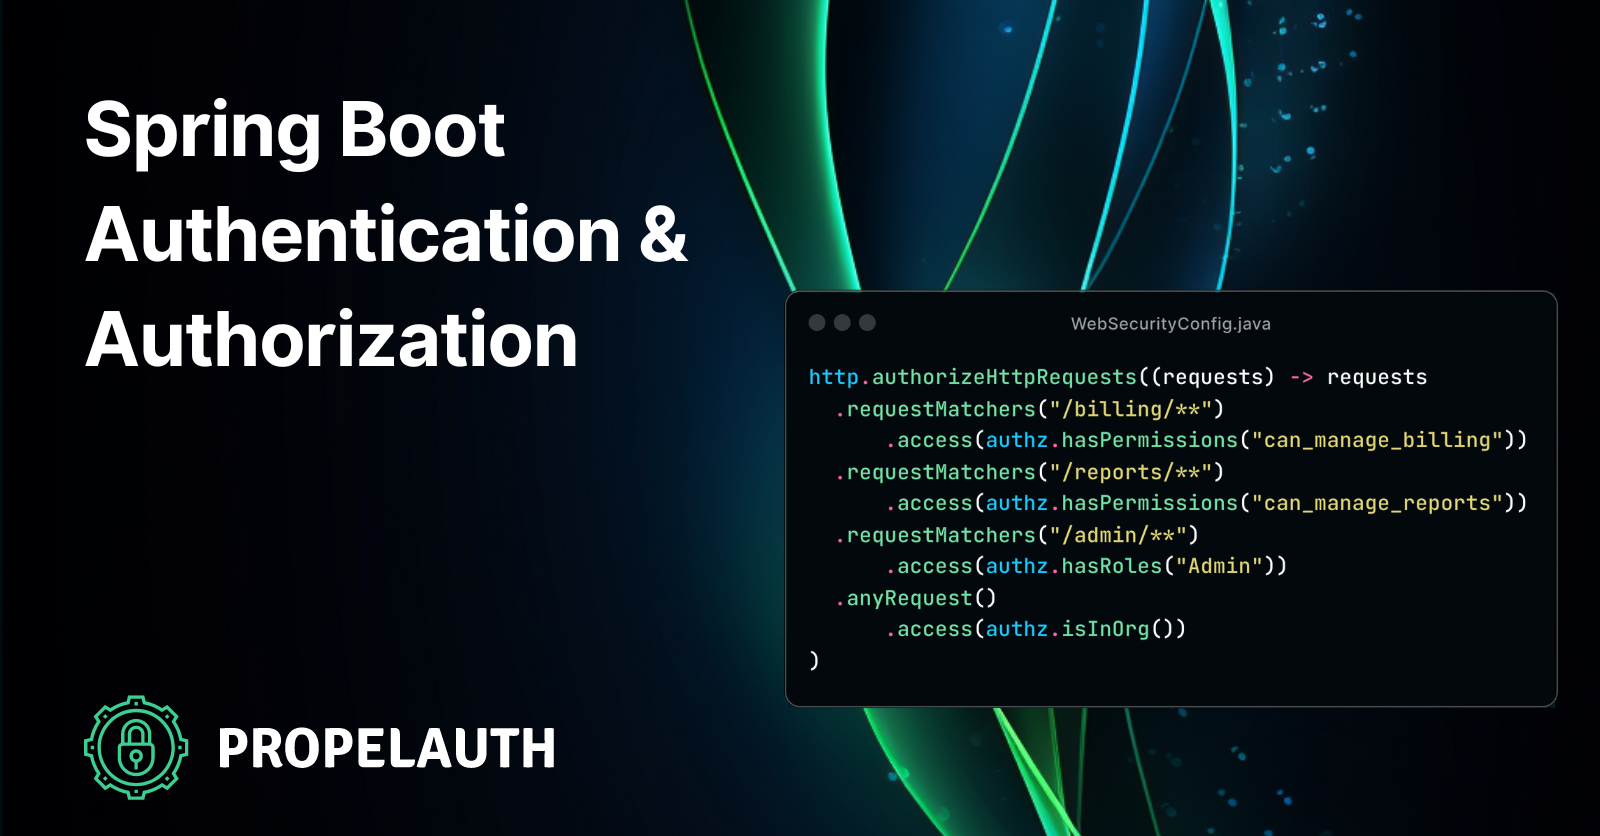 Learn how to add authentication and authorization to a Spring Boot application with PropelAuth and Spring Security.